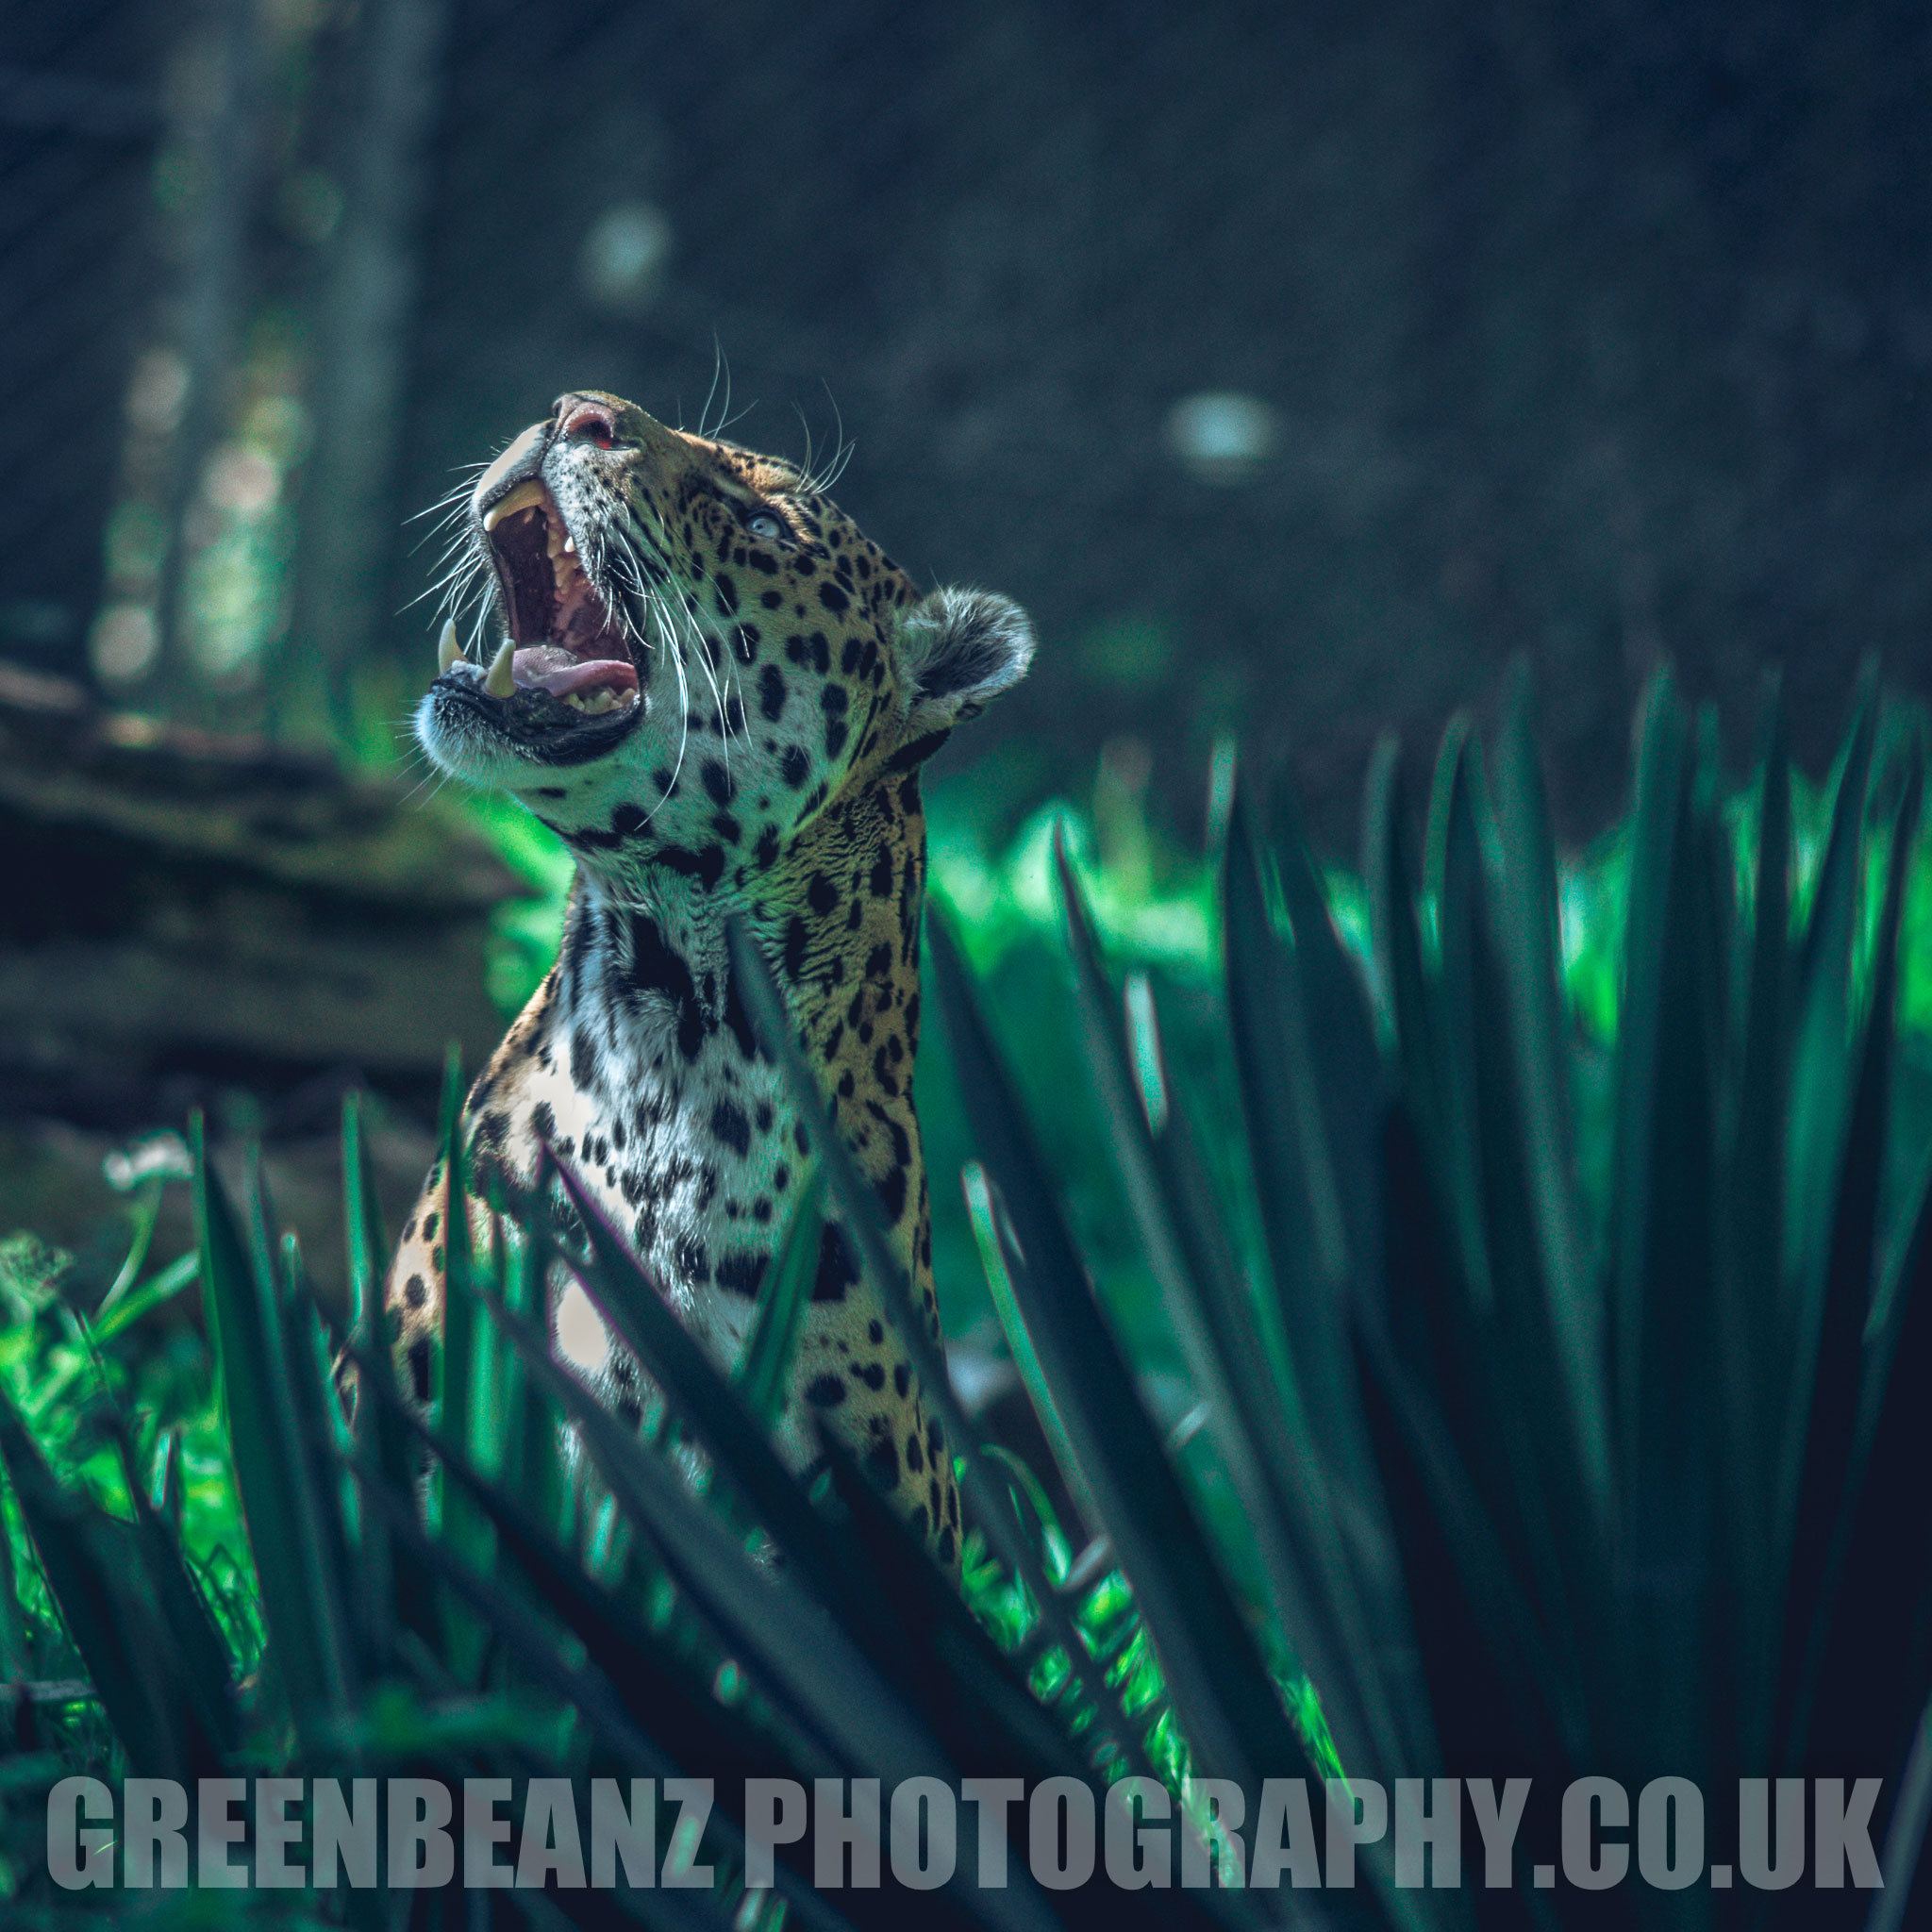 Jaguar photographed with tropical plant in foreground